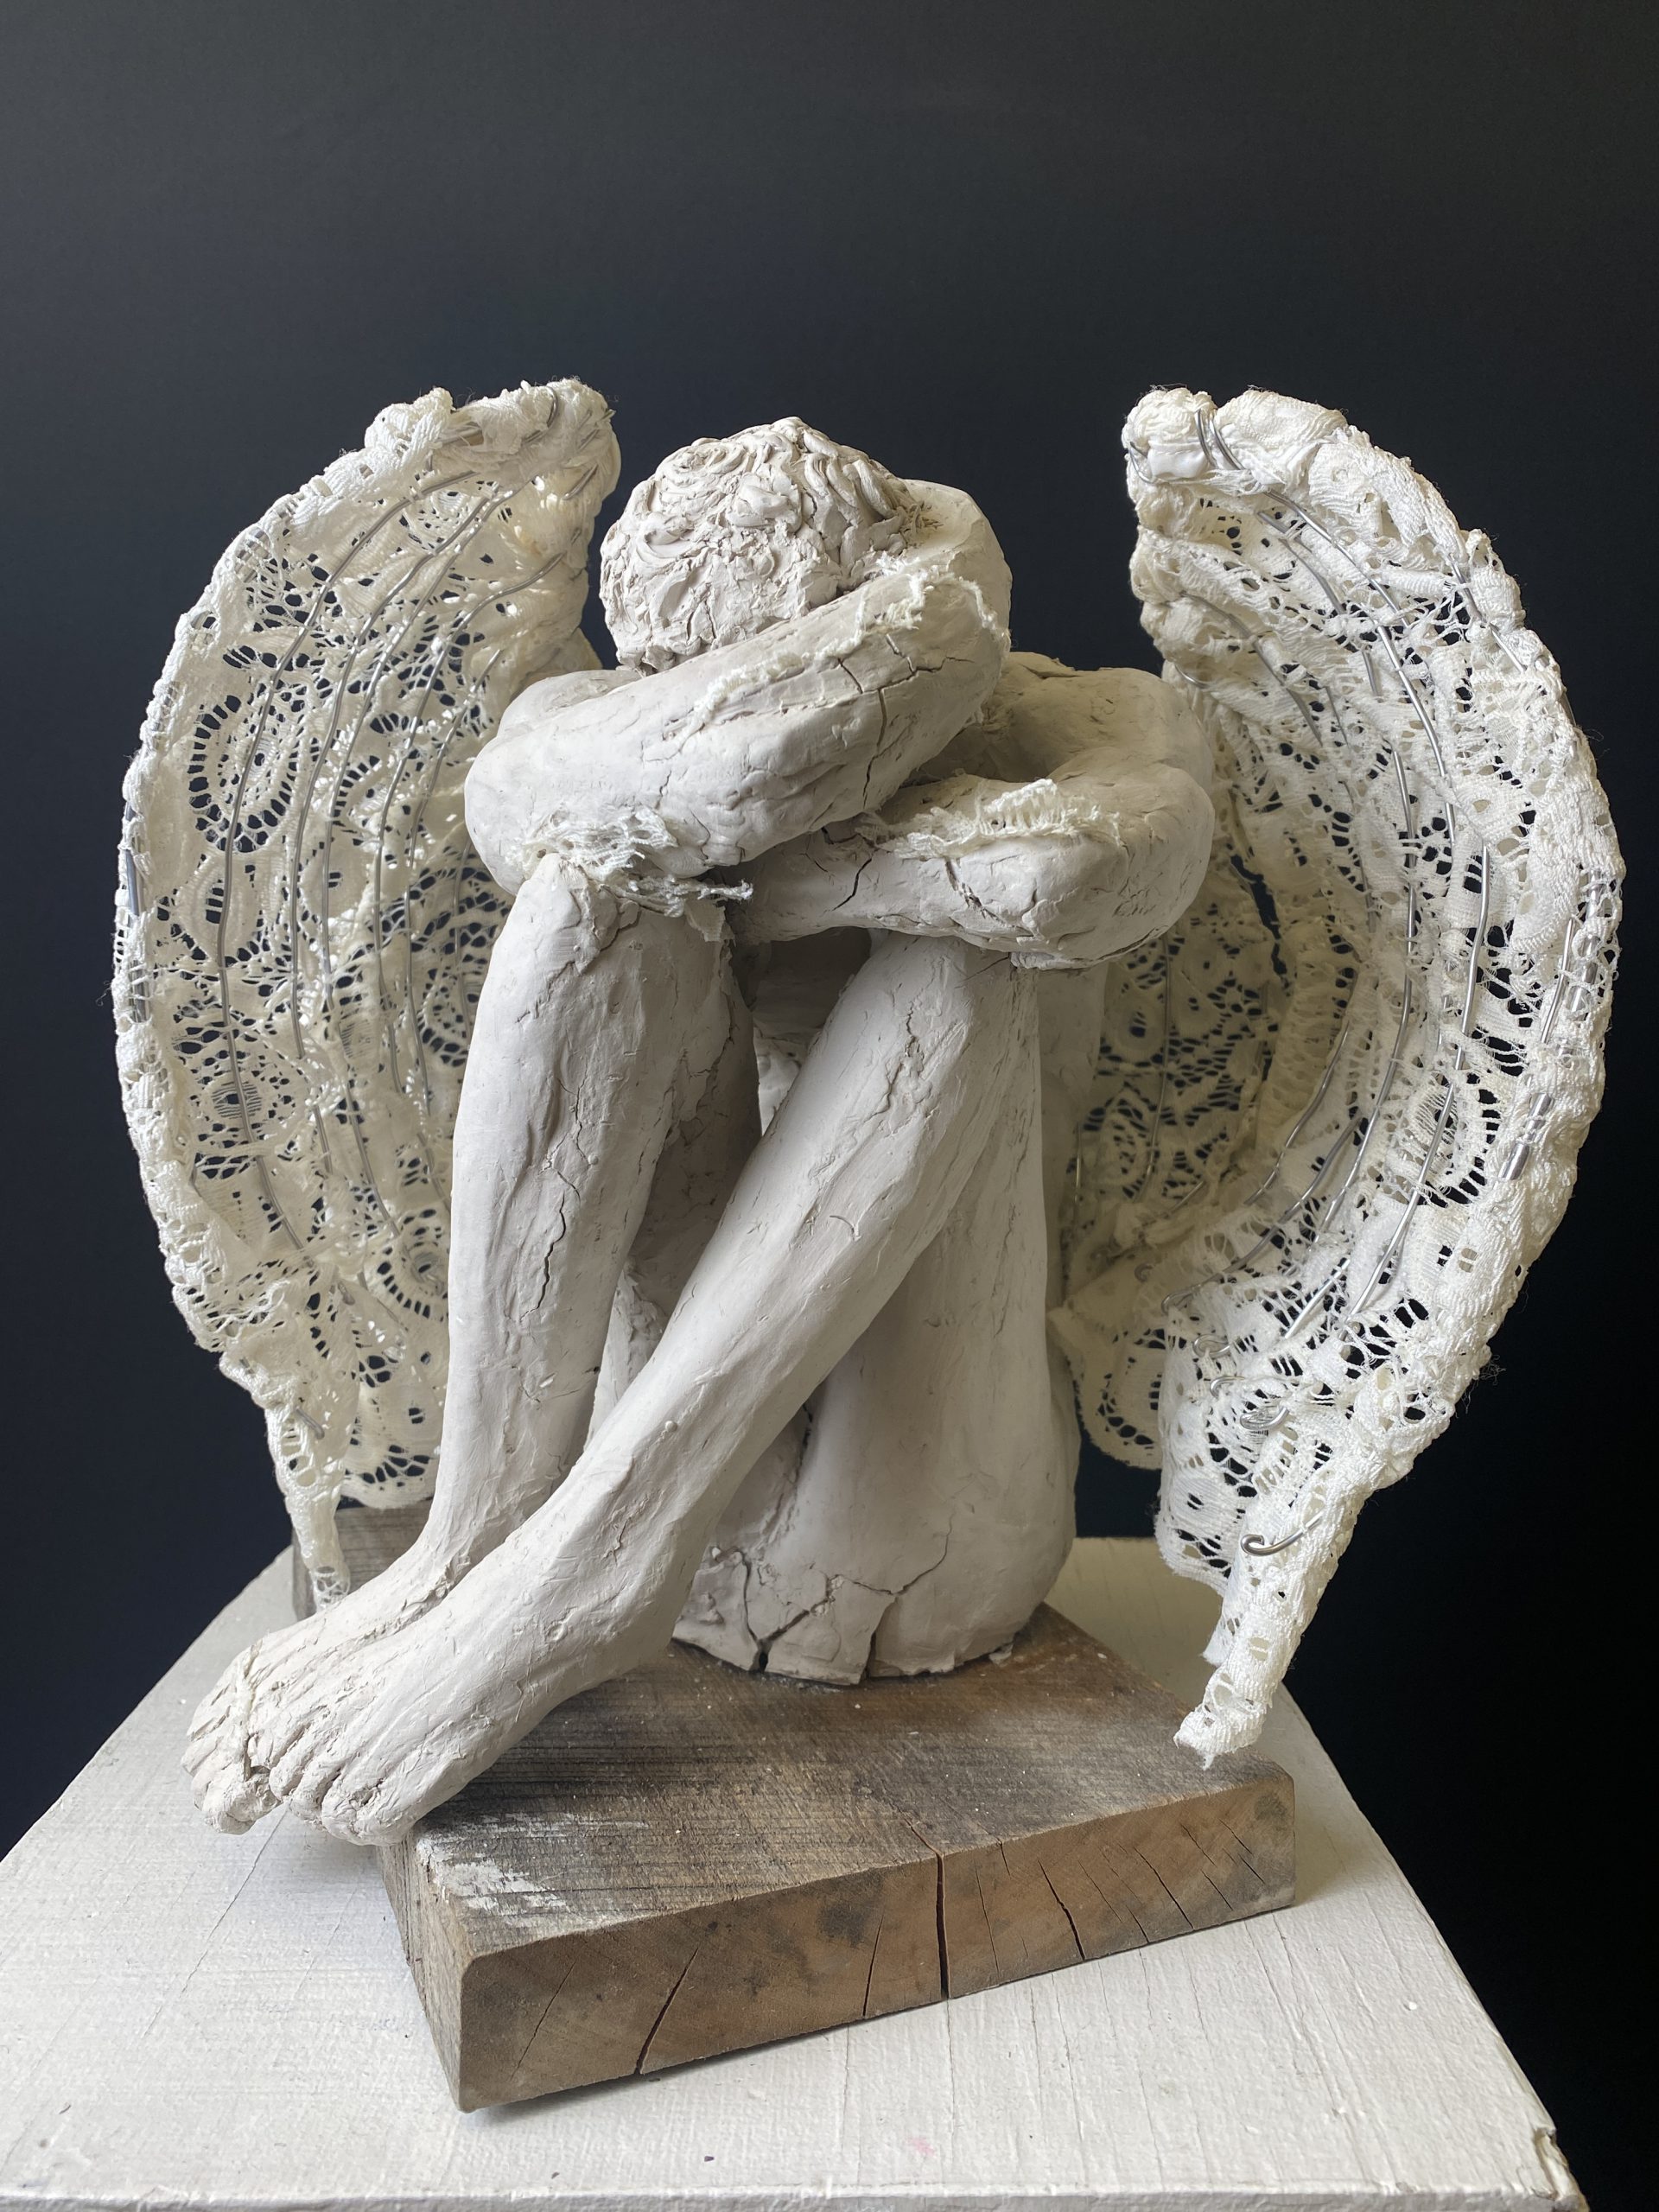 Student artwork: a sculpture of an angel sitting down with hands crossed on knees, head down